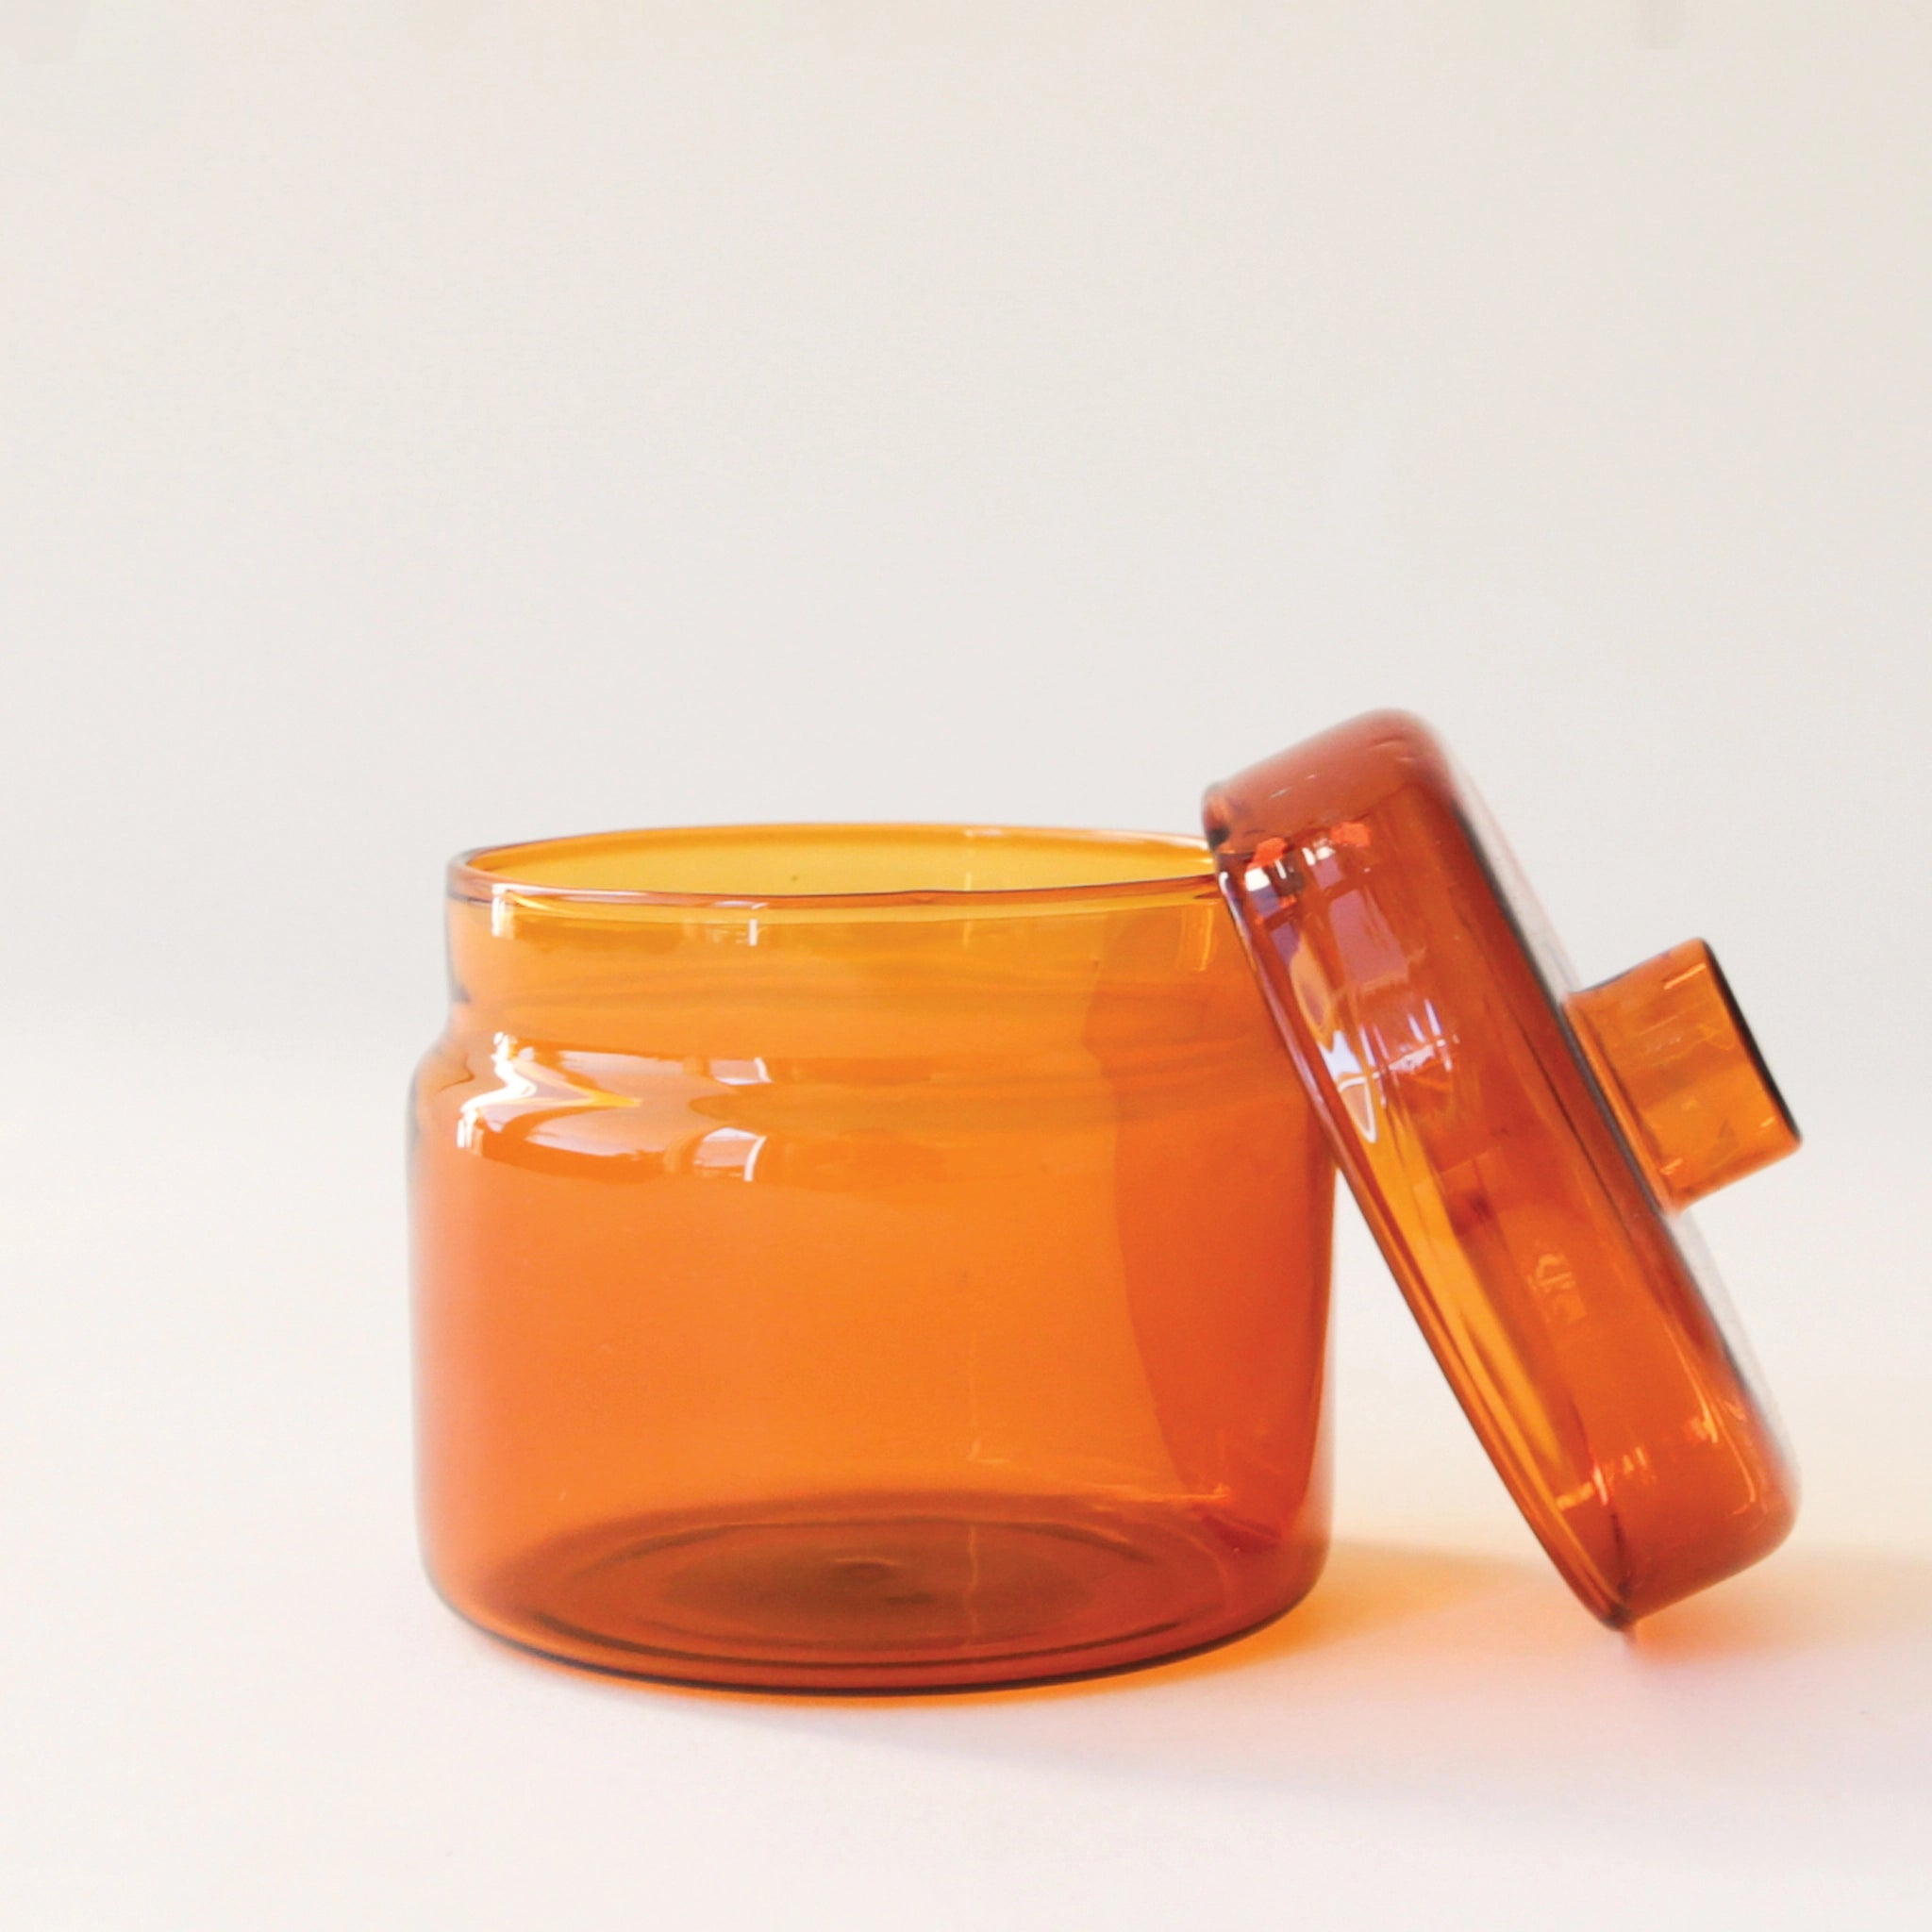 A round glass amber jar with a coordinating glass lid that has a round, flat knob on top.